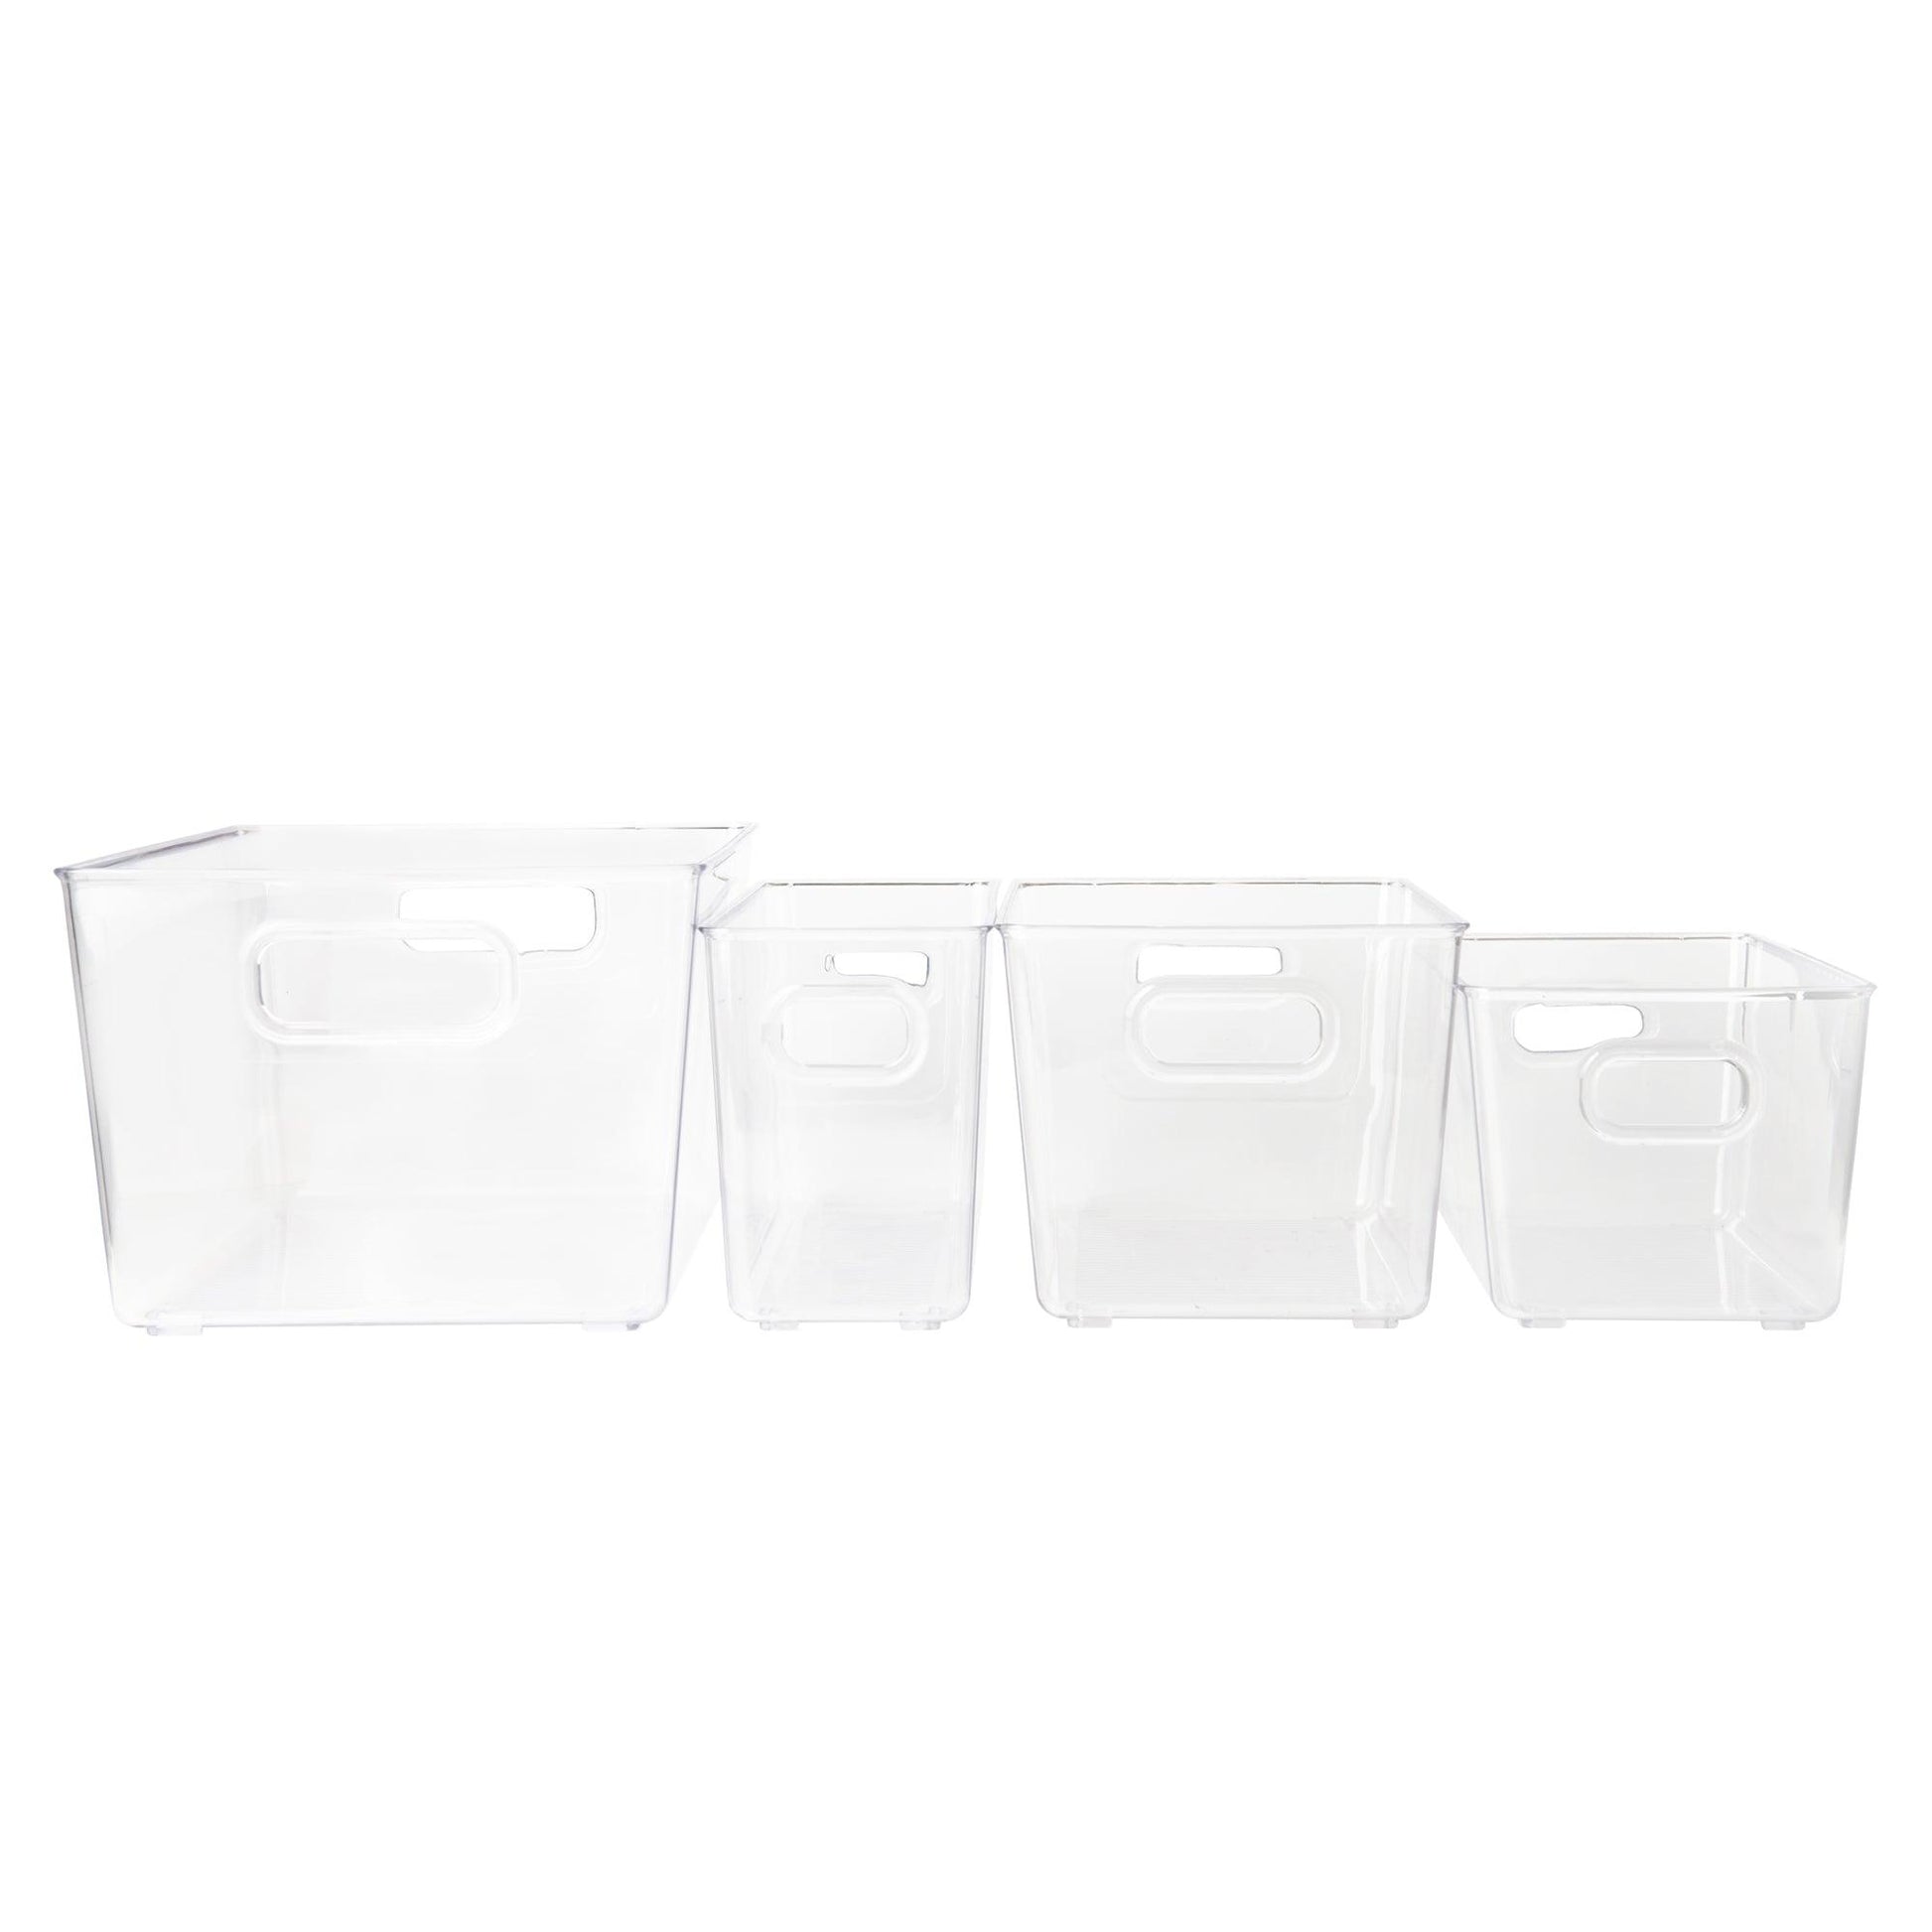 Clear Storage Tub Mini - Little Label Co - Kitchen Organizers - 20%, Catchoftheday, mw_grouped_product